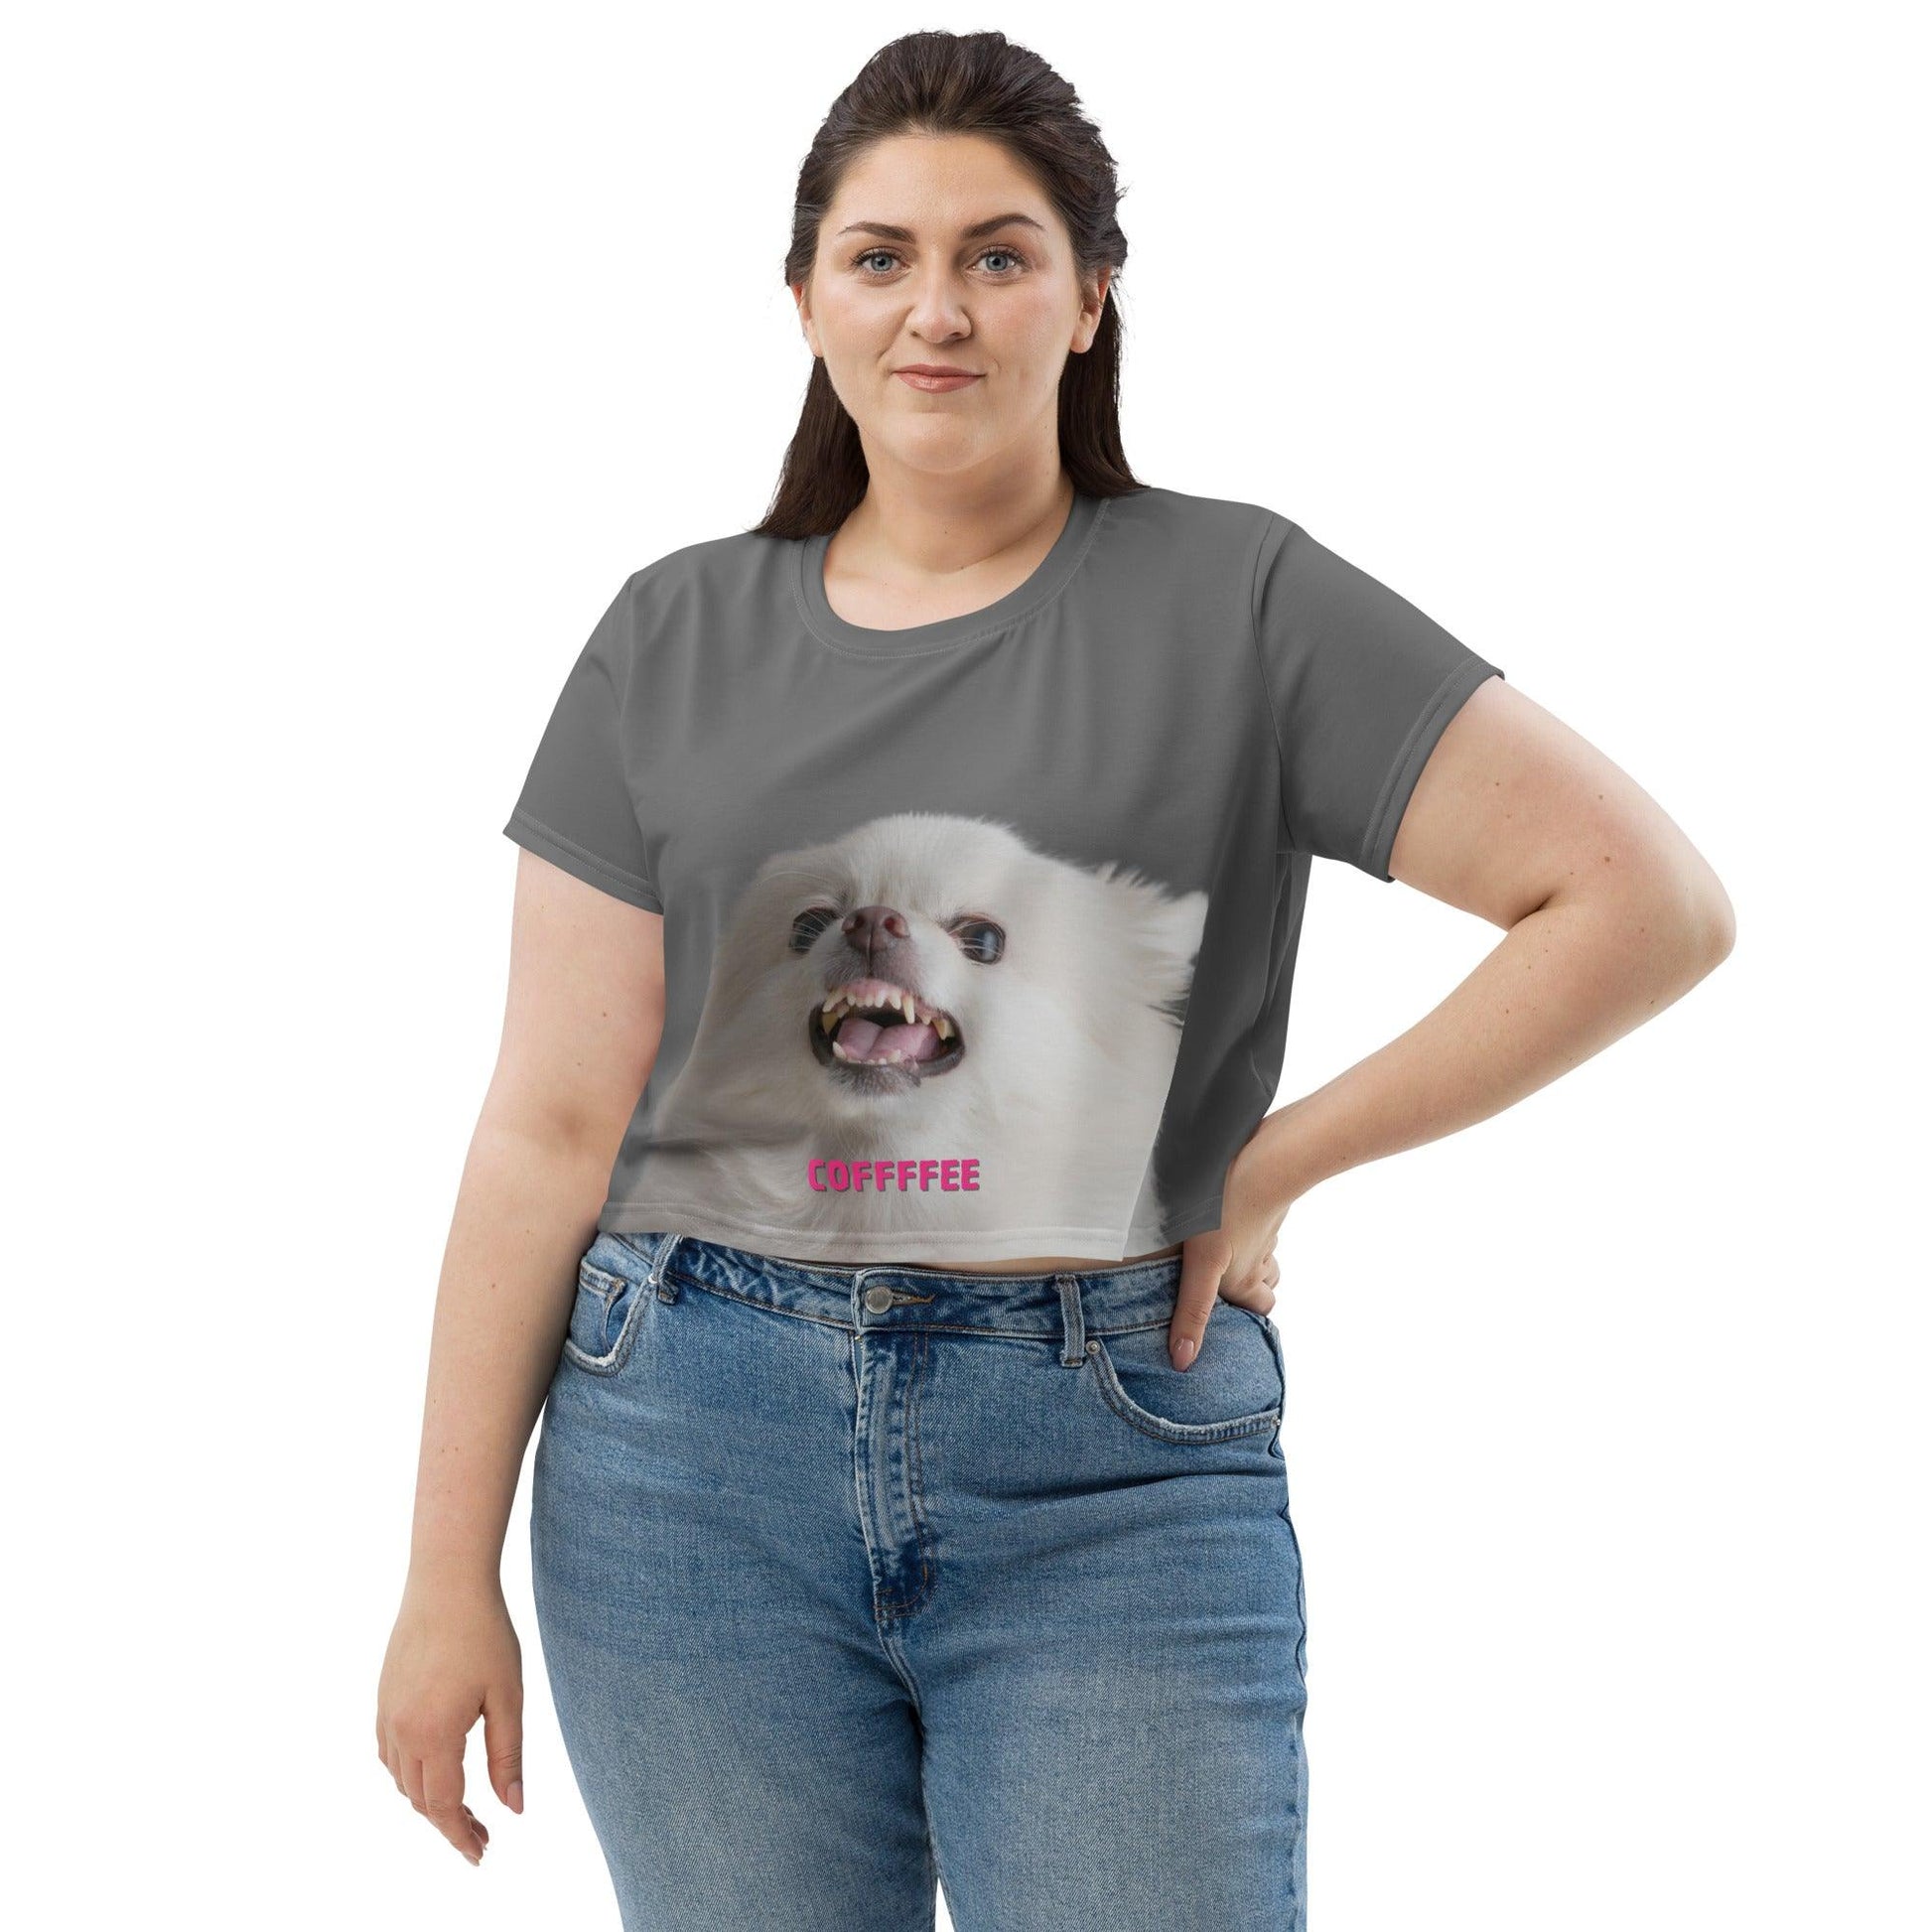 COFFFFEE - grey women's crop top.  A cute and fluffy white chihuahua is feeling tetchy first thing in the morning and barking - snapping - their order for coffee. (Top of the morning to you too, coffee diva.) Best shut up and put the kettle on already! This adorable chihuahua meme crop top is a funny and trendy gift idea for someone who loves chihuahuas and coffee.